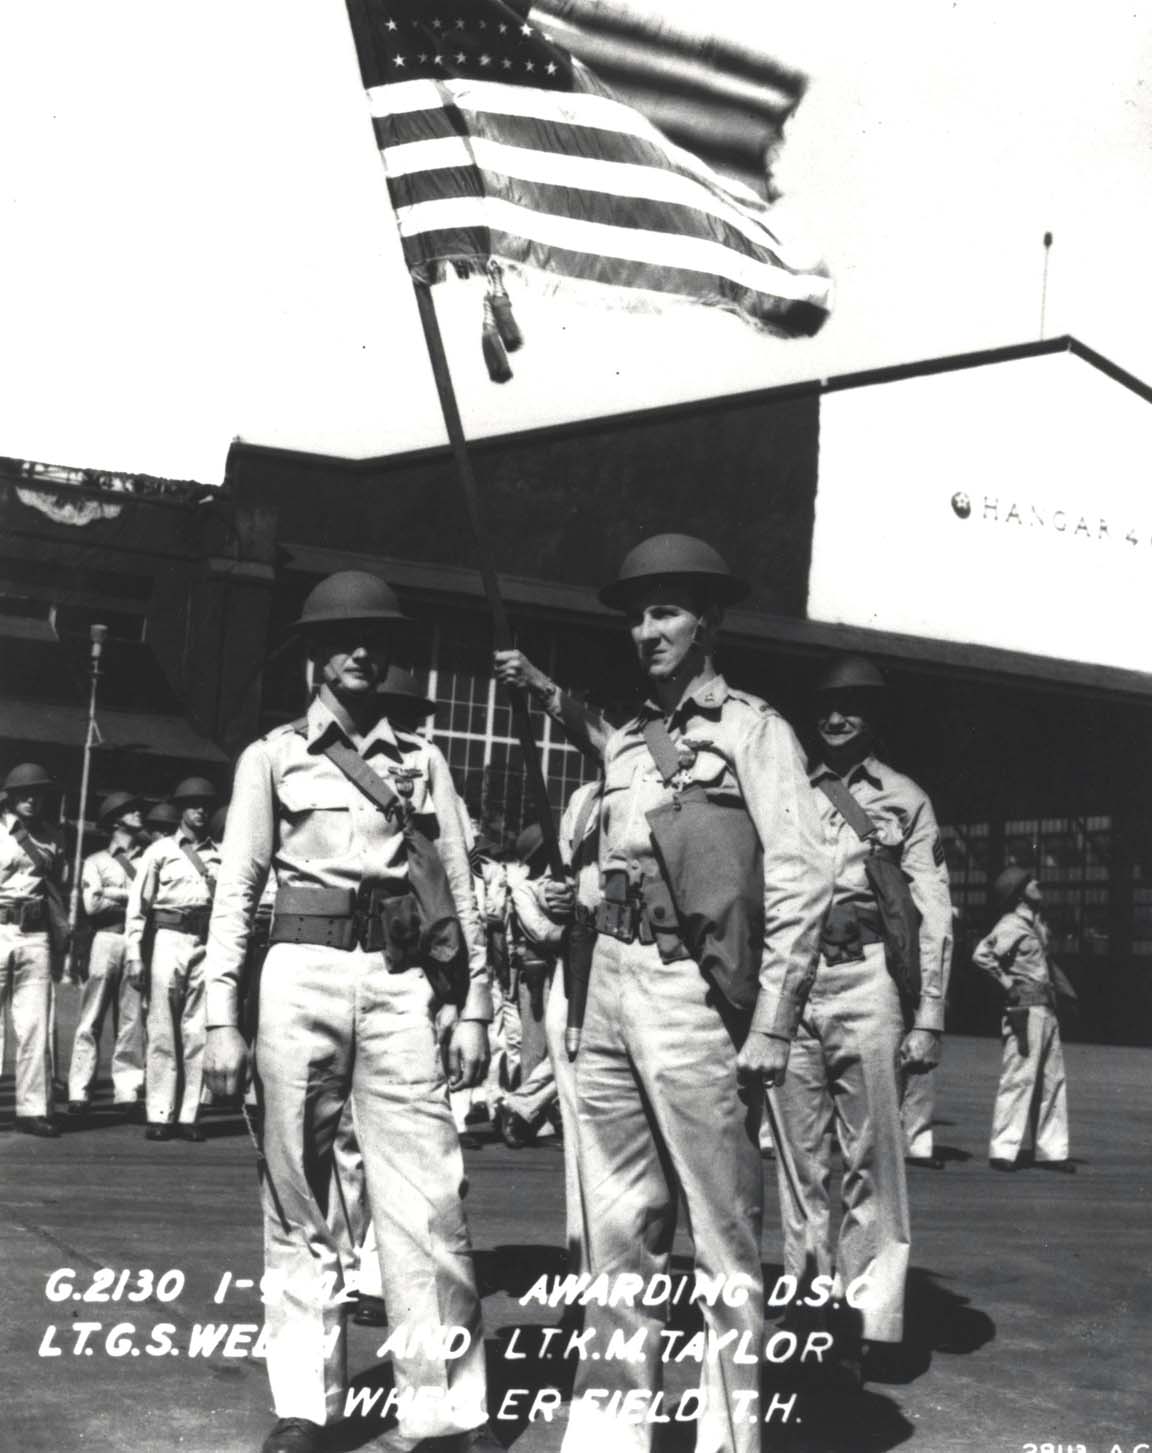 Lt George Welch and Lt Ken Taylor pose for a photograph after the ceremony at Wheeler Field, Hawaii, Jan 9, 1942 where each was presented with the Distinguished Service Cross for their actions on Dec 7, 1941.